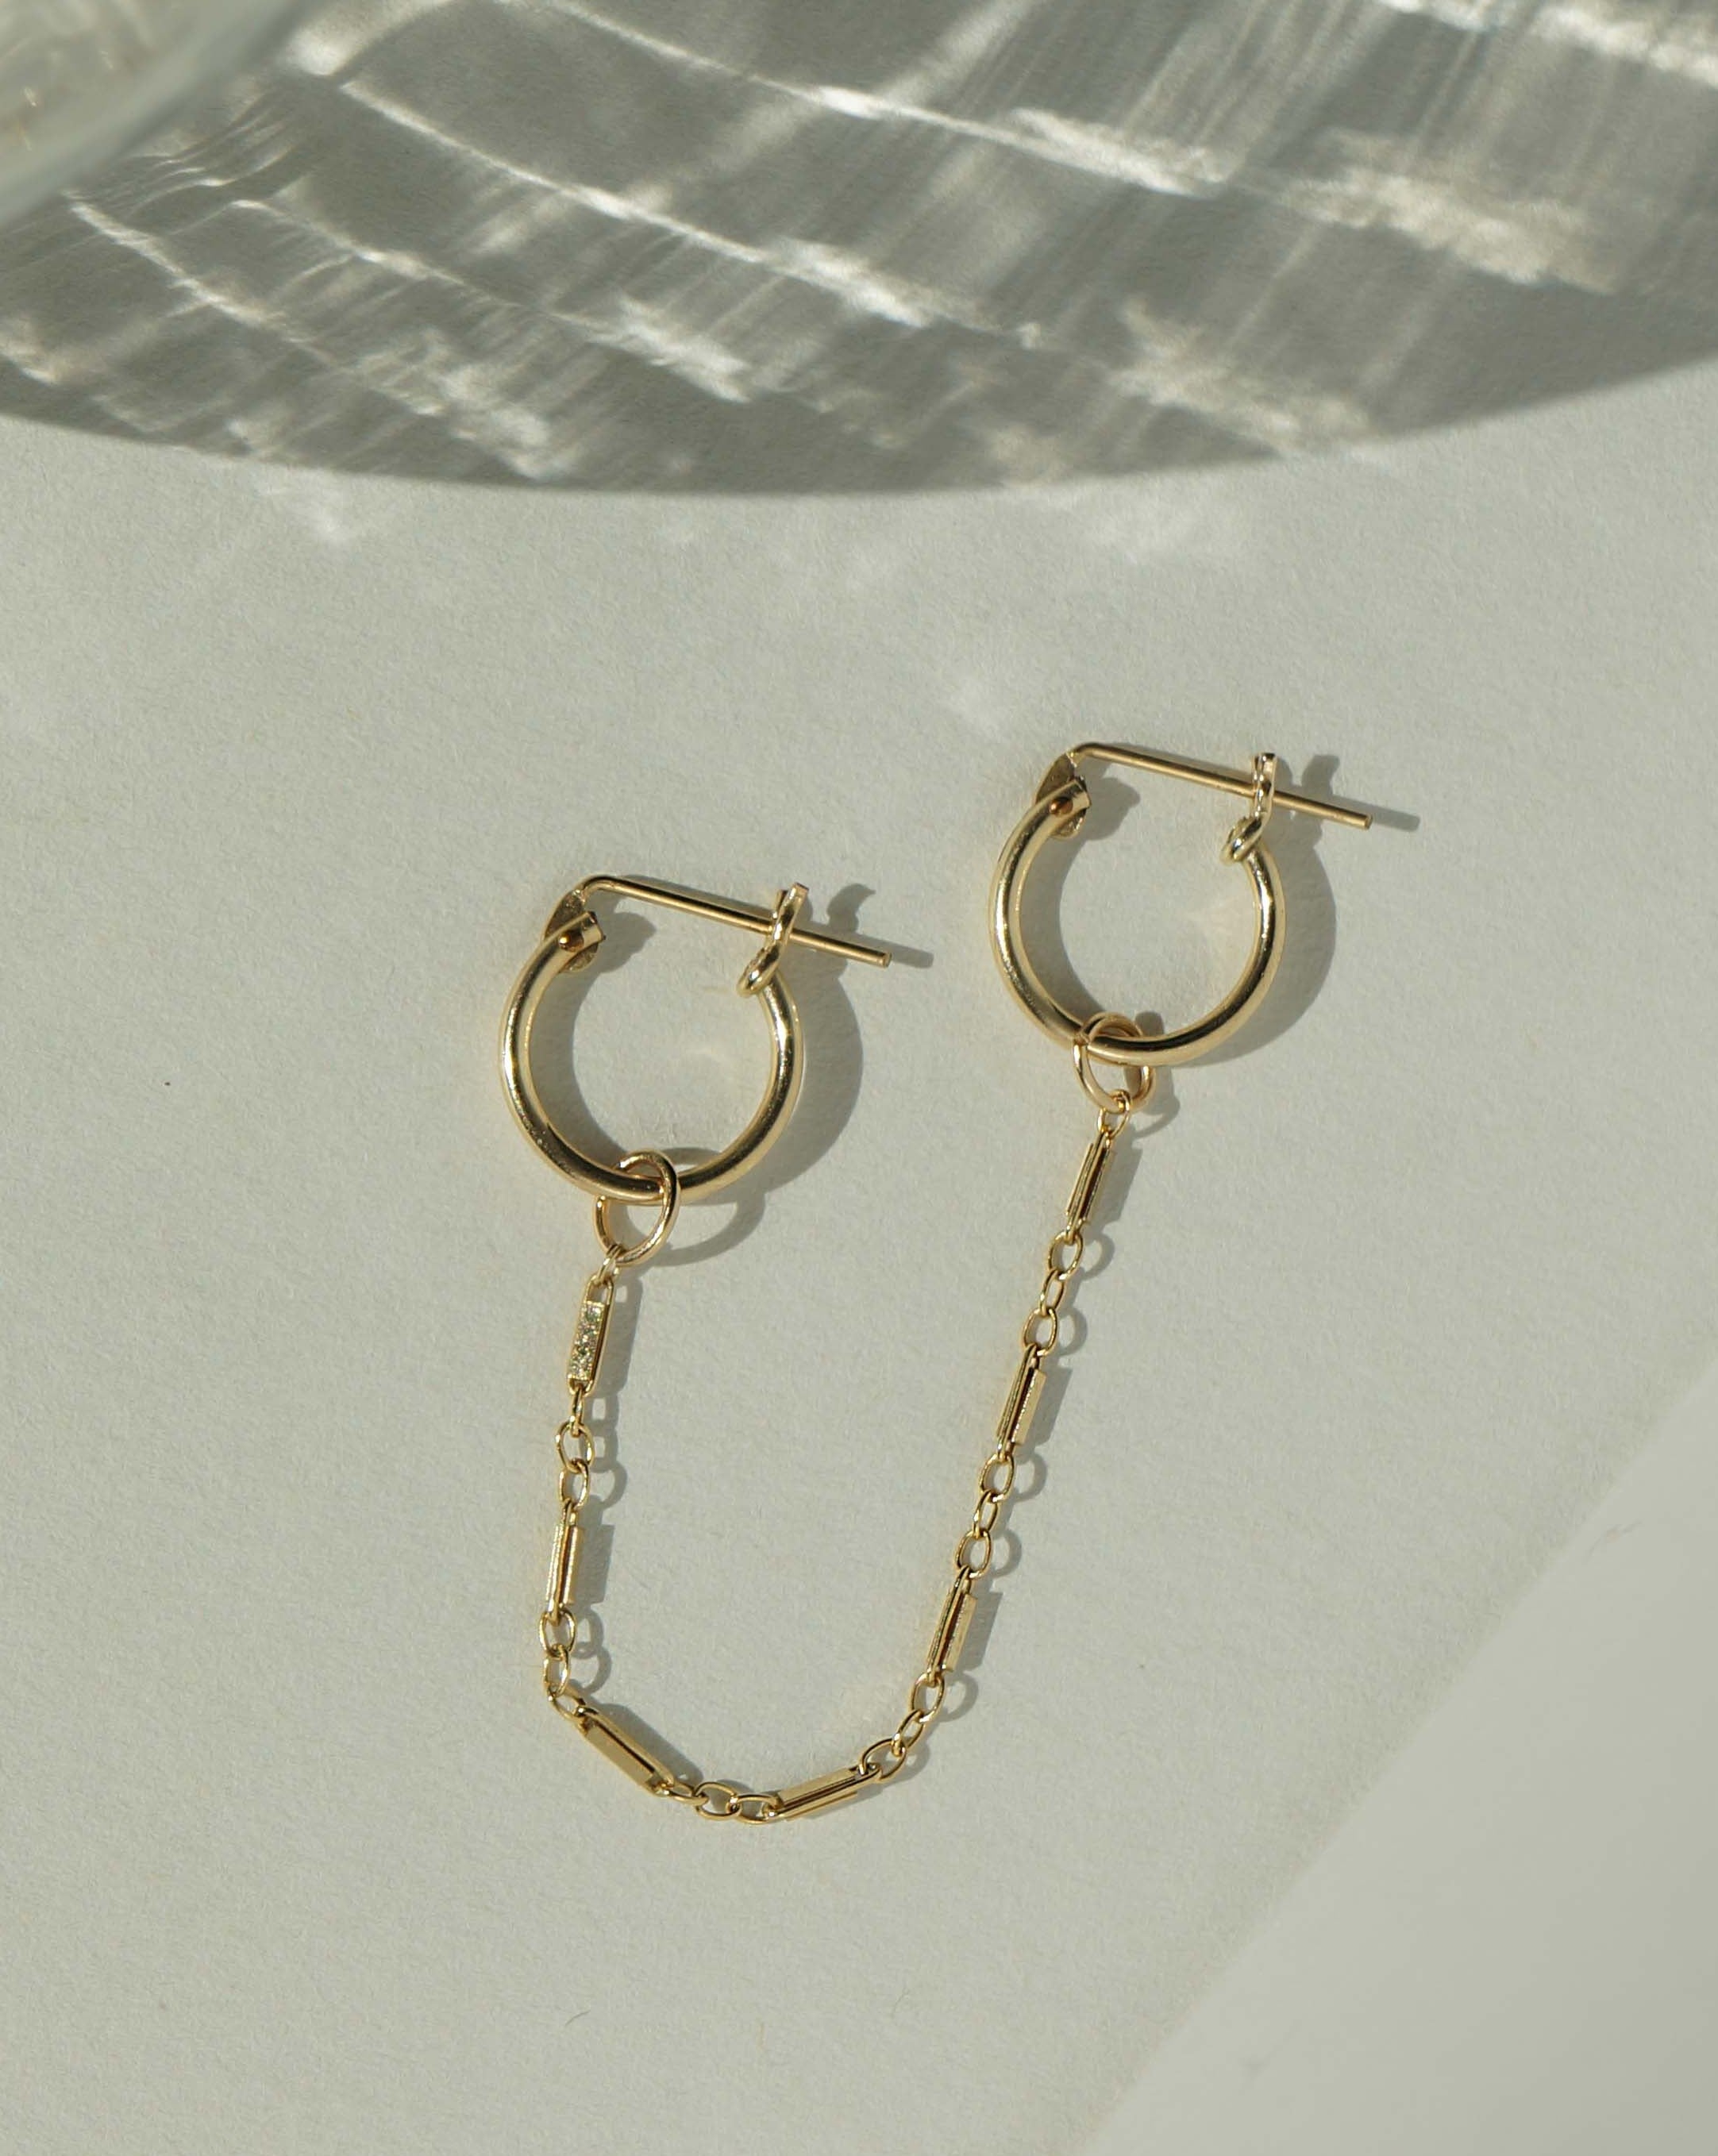 Quinny Chain Hoop by KOZAKH. A climber style earring for 2 piercings, crafted in 14K Gold Filled.